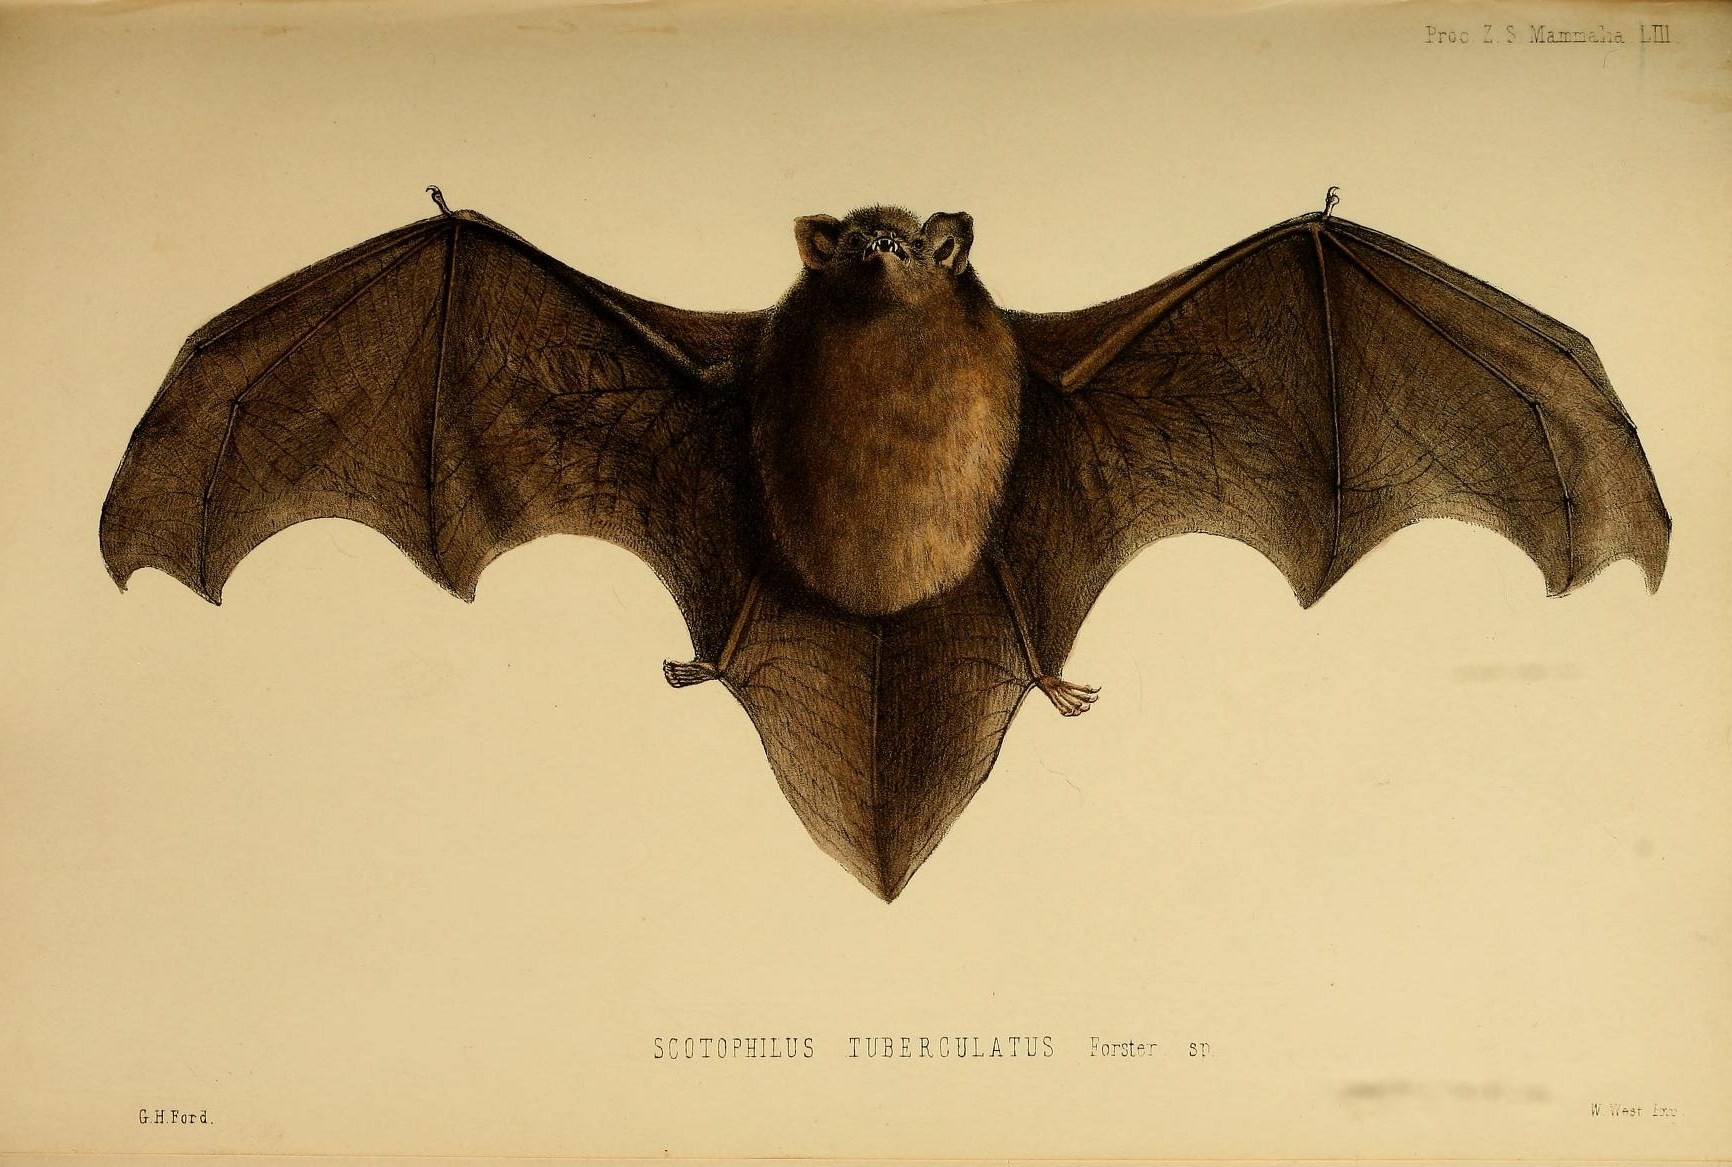 a bat is shown in a sepia - colored painting